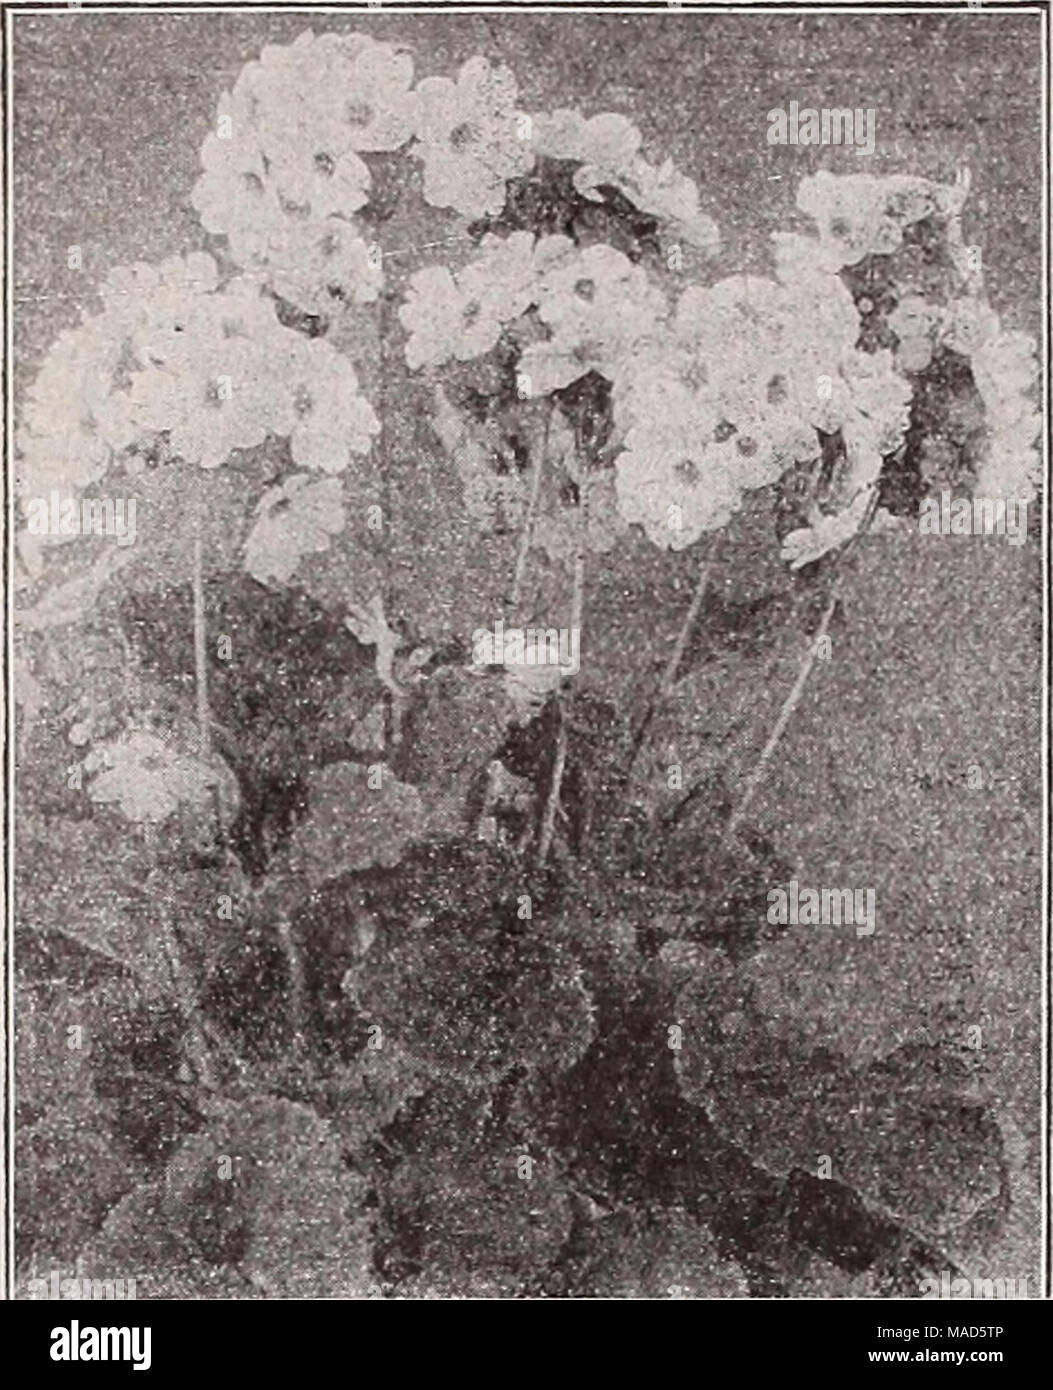 . Dreer's wholesale catalog for florists : winter spring summer 1937 . Primula obconica grandlflora Primula obconica Tr. pkt. G-randifiora Fasbender Bed. Flowers of the largest size, of a deep glowing red color. Plants of compact growth. V64 oz. $2.00 $1 00 — Mueller and Mohnstein. Shades of pink and red. mixed. Ve* oz. $2.00 1 00 — Mueller Bose. V&lt;m oz. $2.00 1 00 — Molinsteln Bed. V94 oz. $2.00 1 00 — Finest Mixed. Vie oz. $1.50 40 Gigantea Celestial Blue. Vm oz. $1.00 50 —Kermesina. Rich crimson. V&lt;n oz. $1.00 50 — rosea. Fine rose, ^/m oz. $1.00 50 —Salmon Queen. Beautiful salmon. Ve Stock Photo